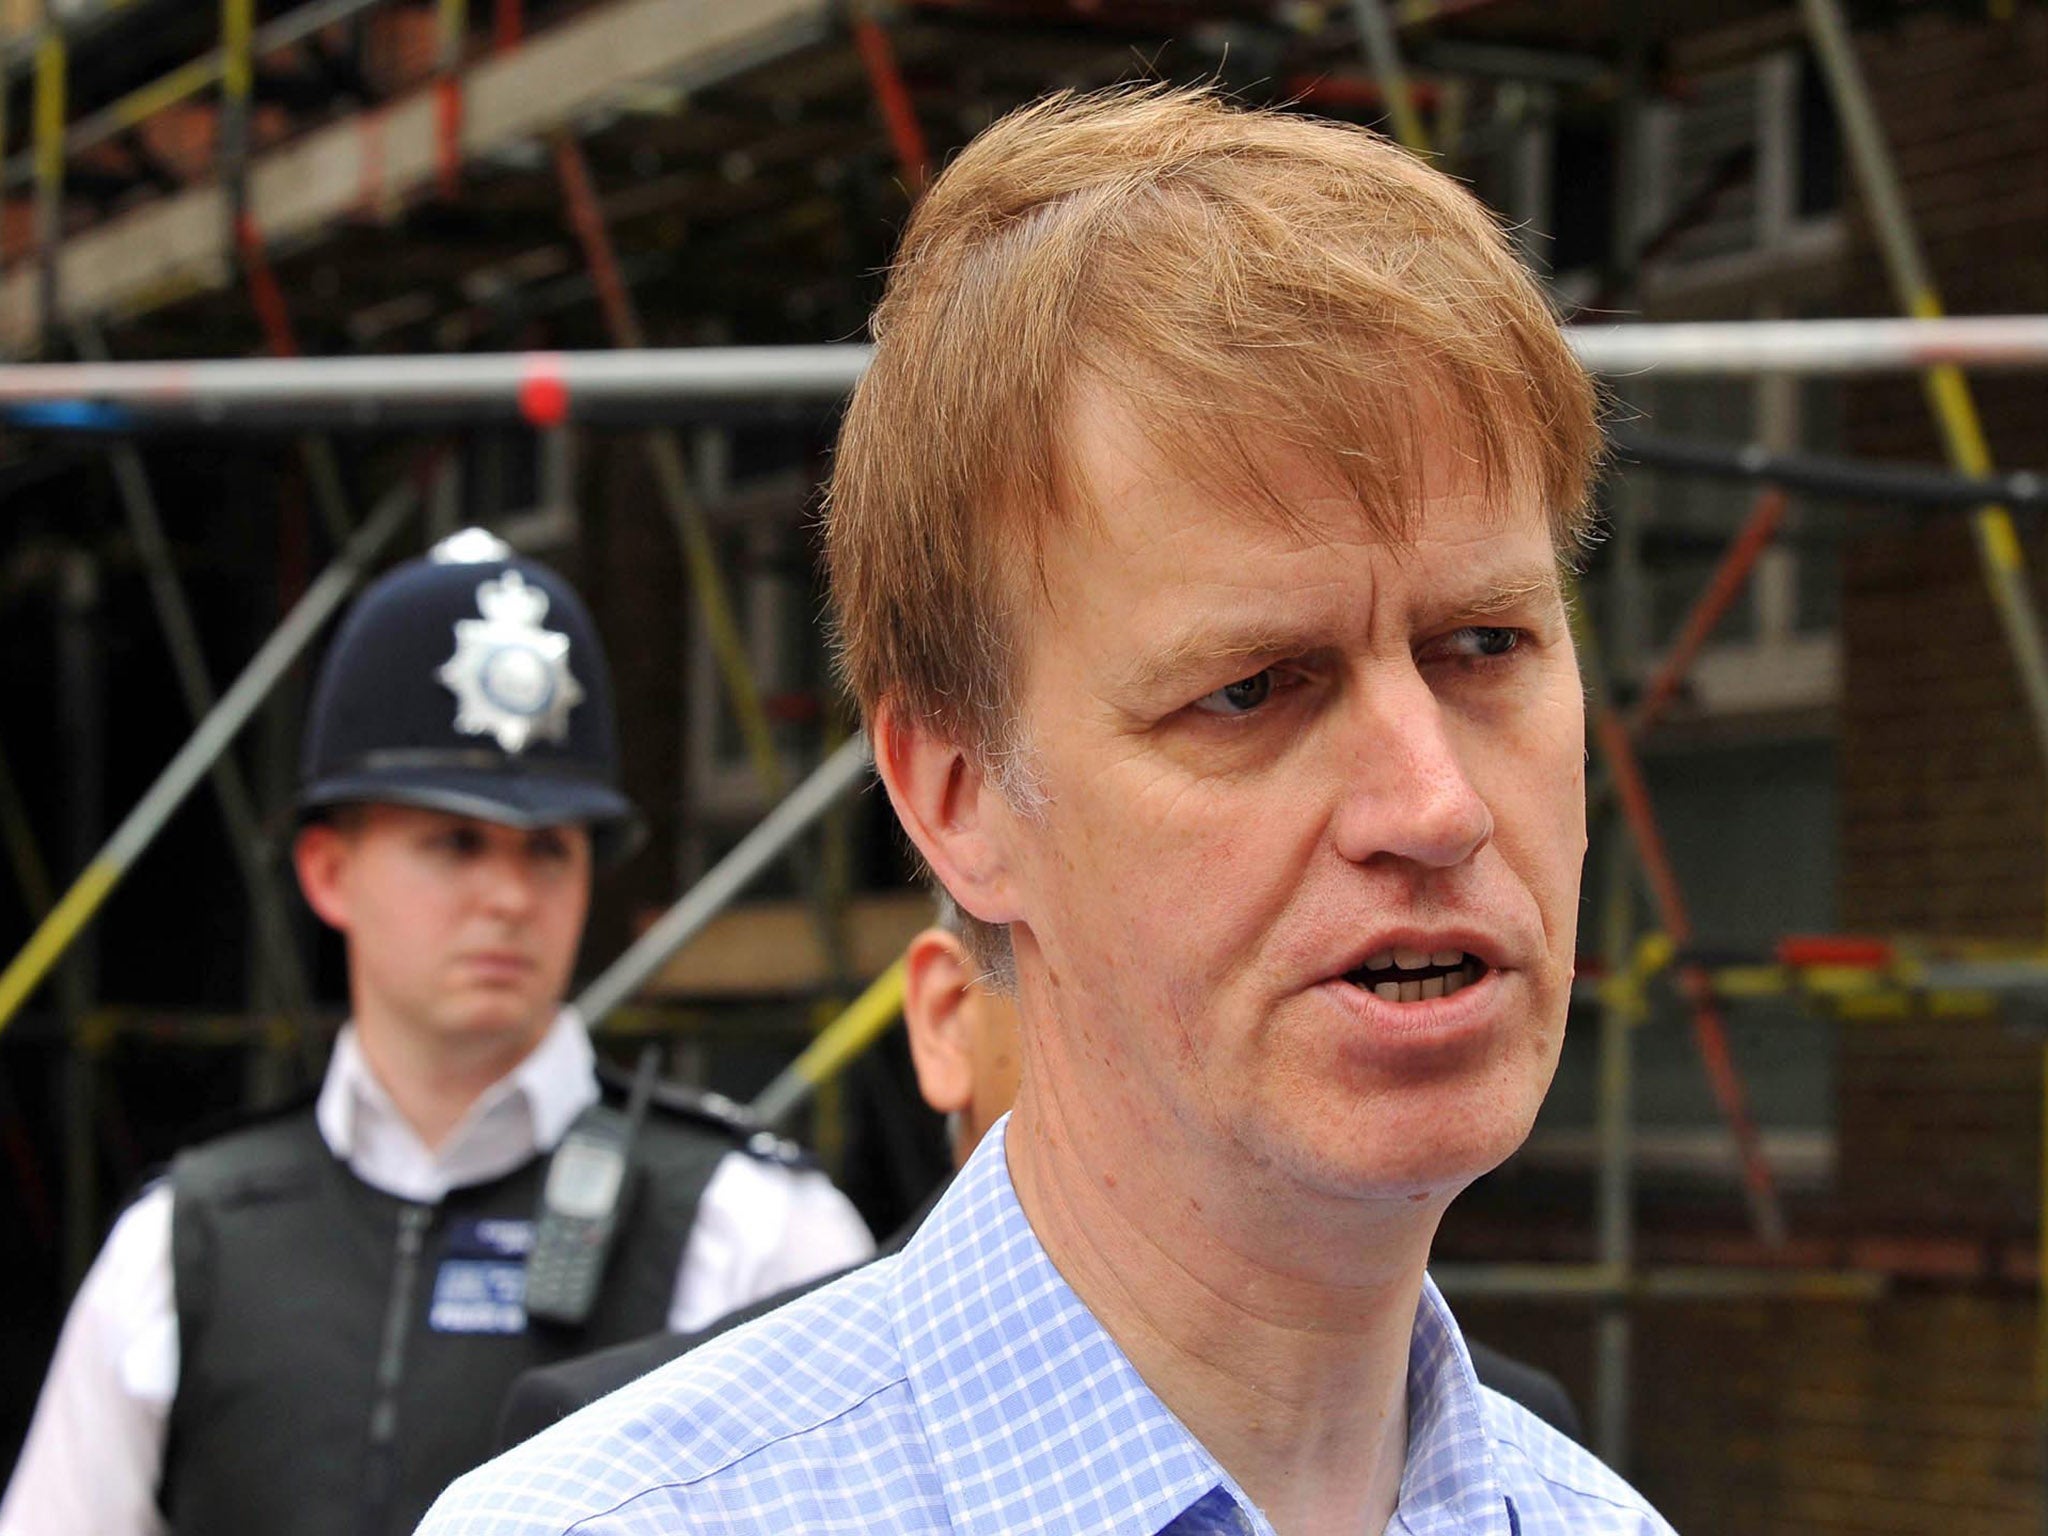 Stephen Timms, the Labour MP for Newham, was stabbed in 2010